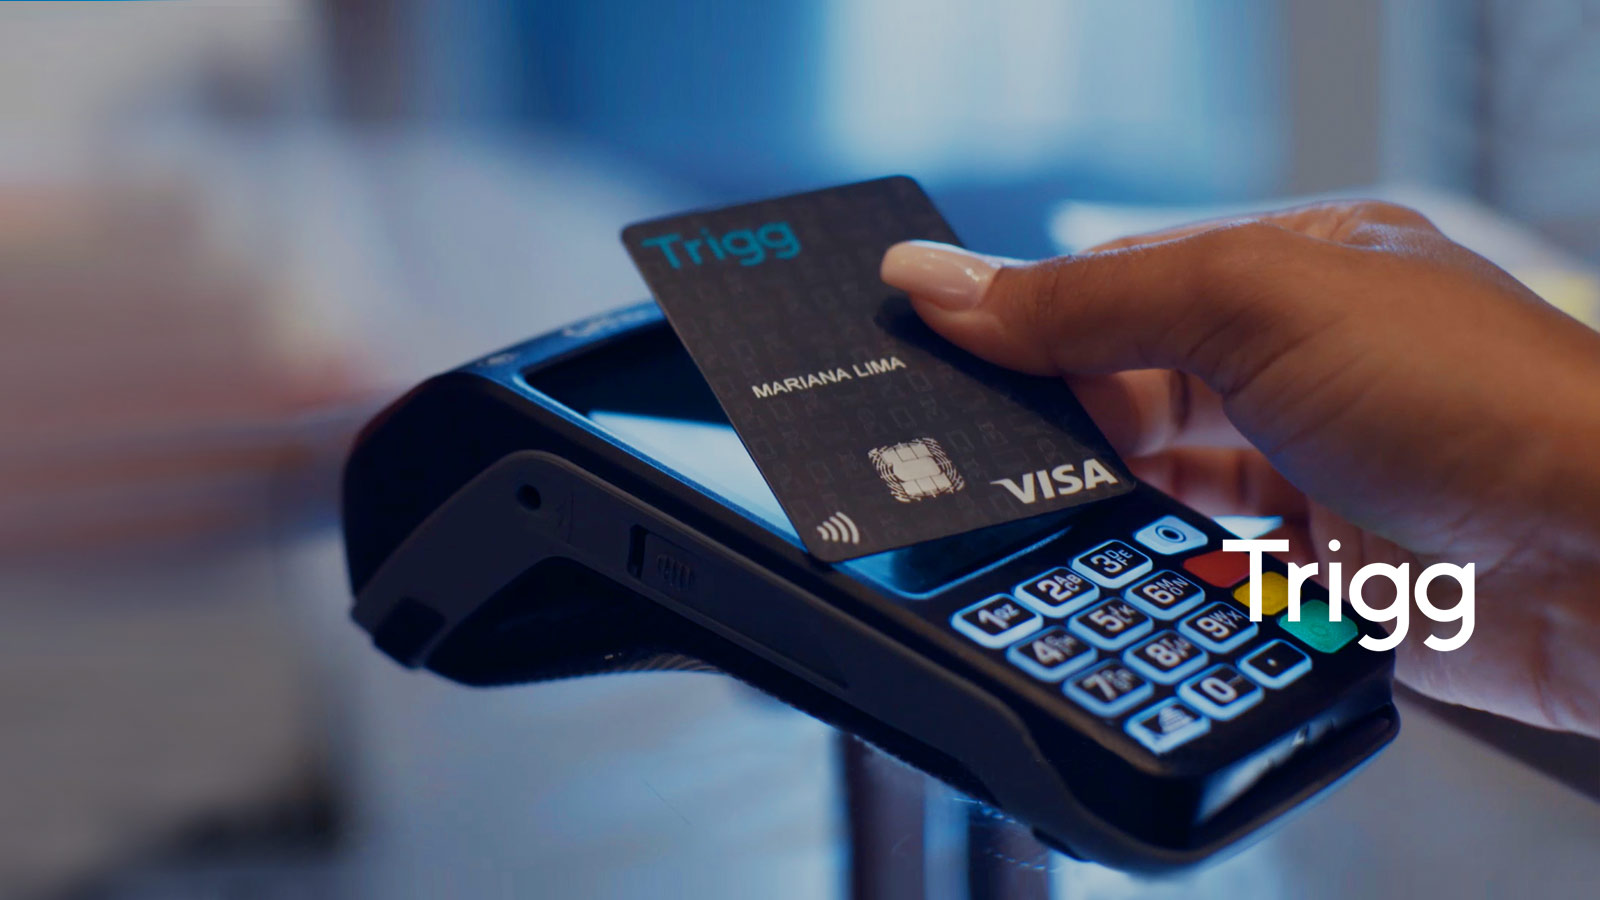 Close up of a person using a Visa card with a Trigg logo on it to make a point of sale transaction.